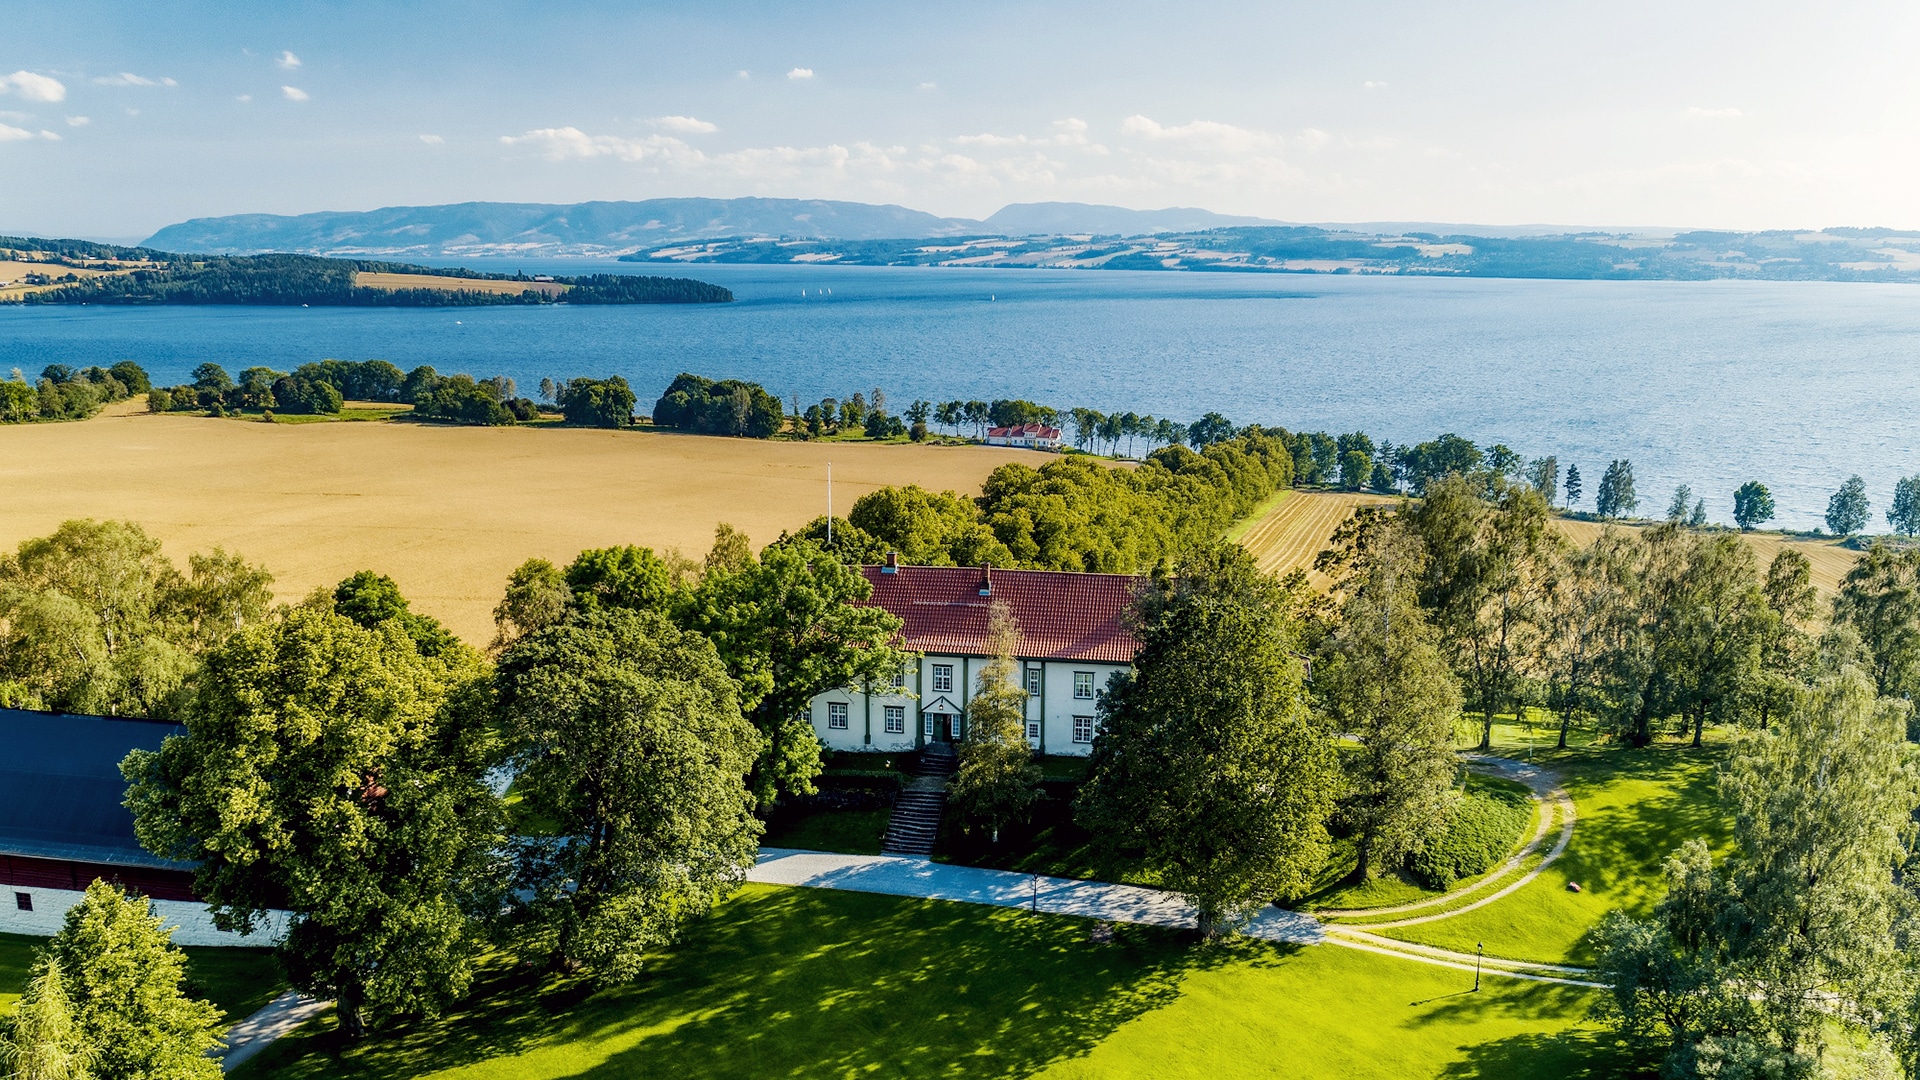 The main house of Hoel farm surrounded by trees and fields in front of Mjøsa.